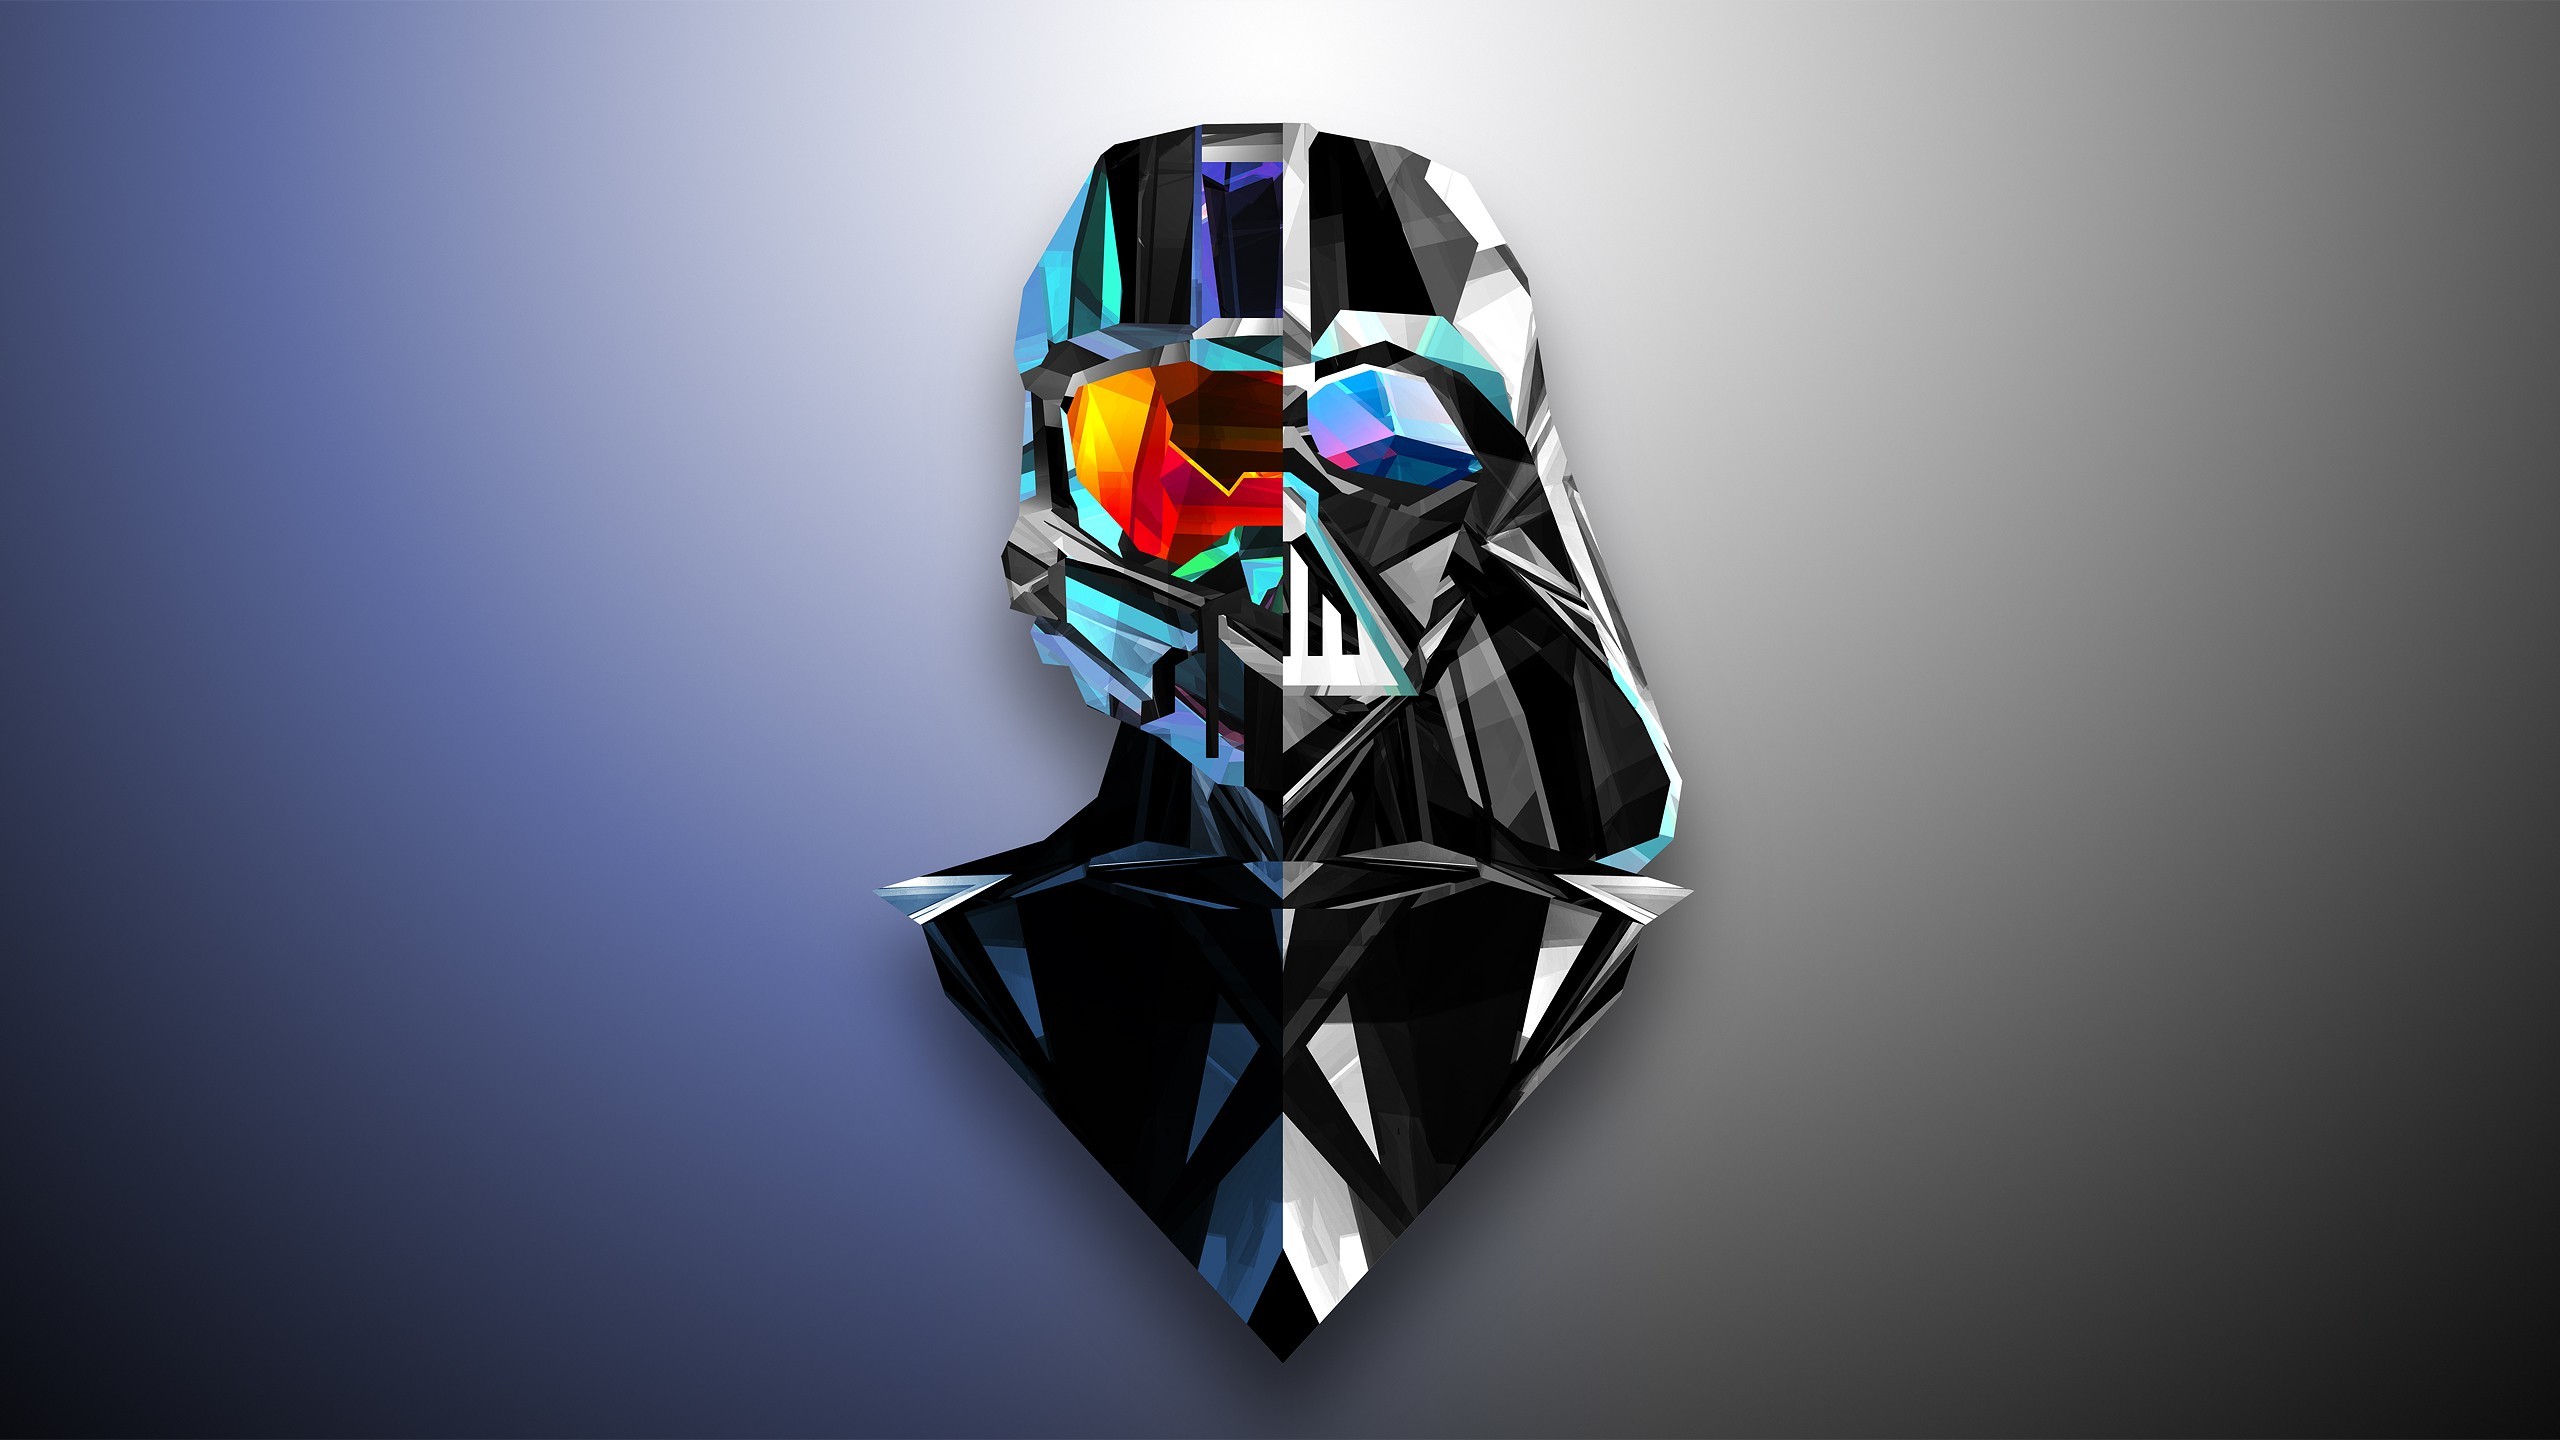 Abstract, Darth Vader, Master Chief, Low Poly, Justin Maller, Halo Wallpapers HD / Desktop and Mobile Backgrounds